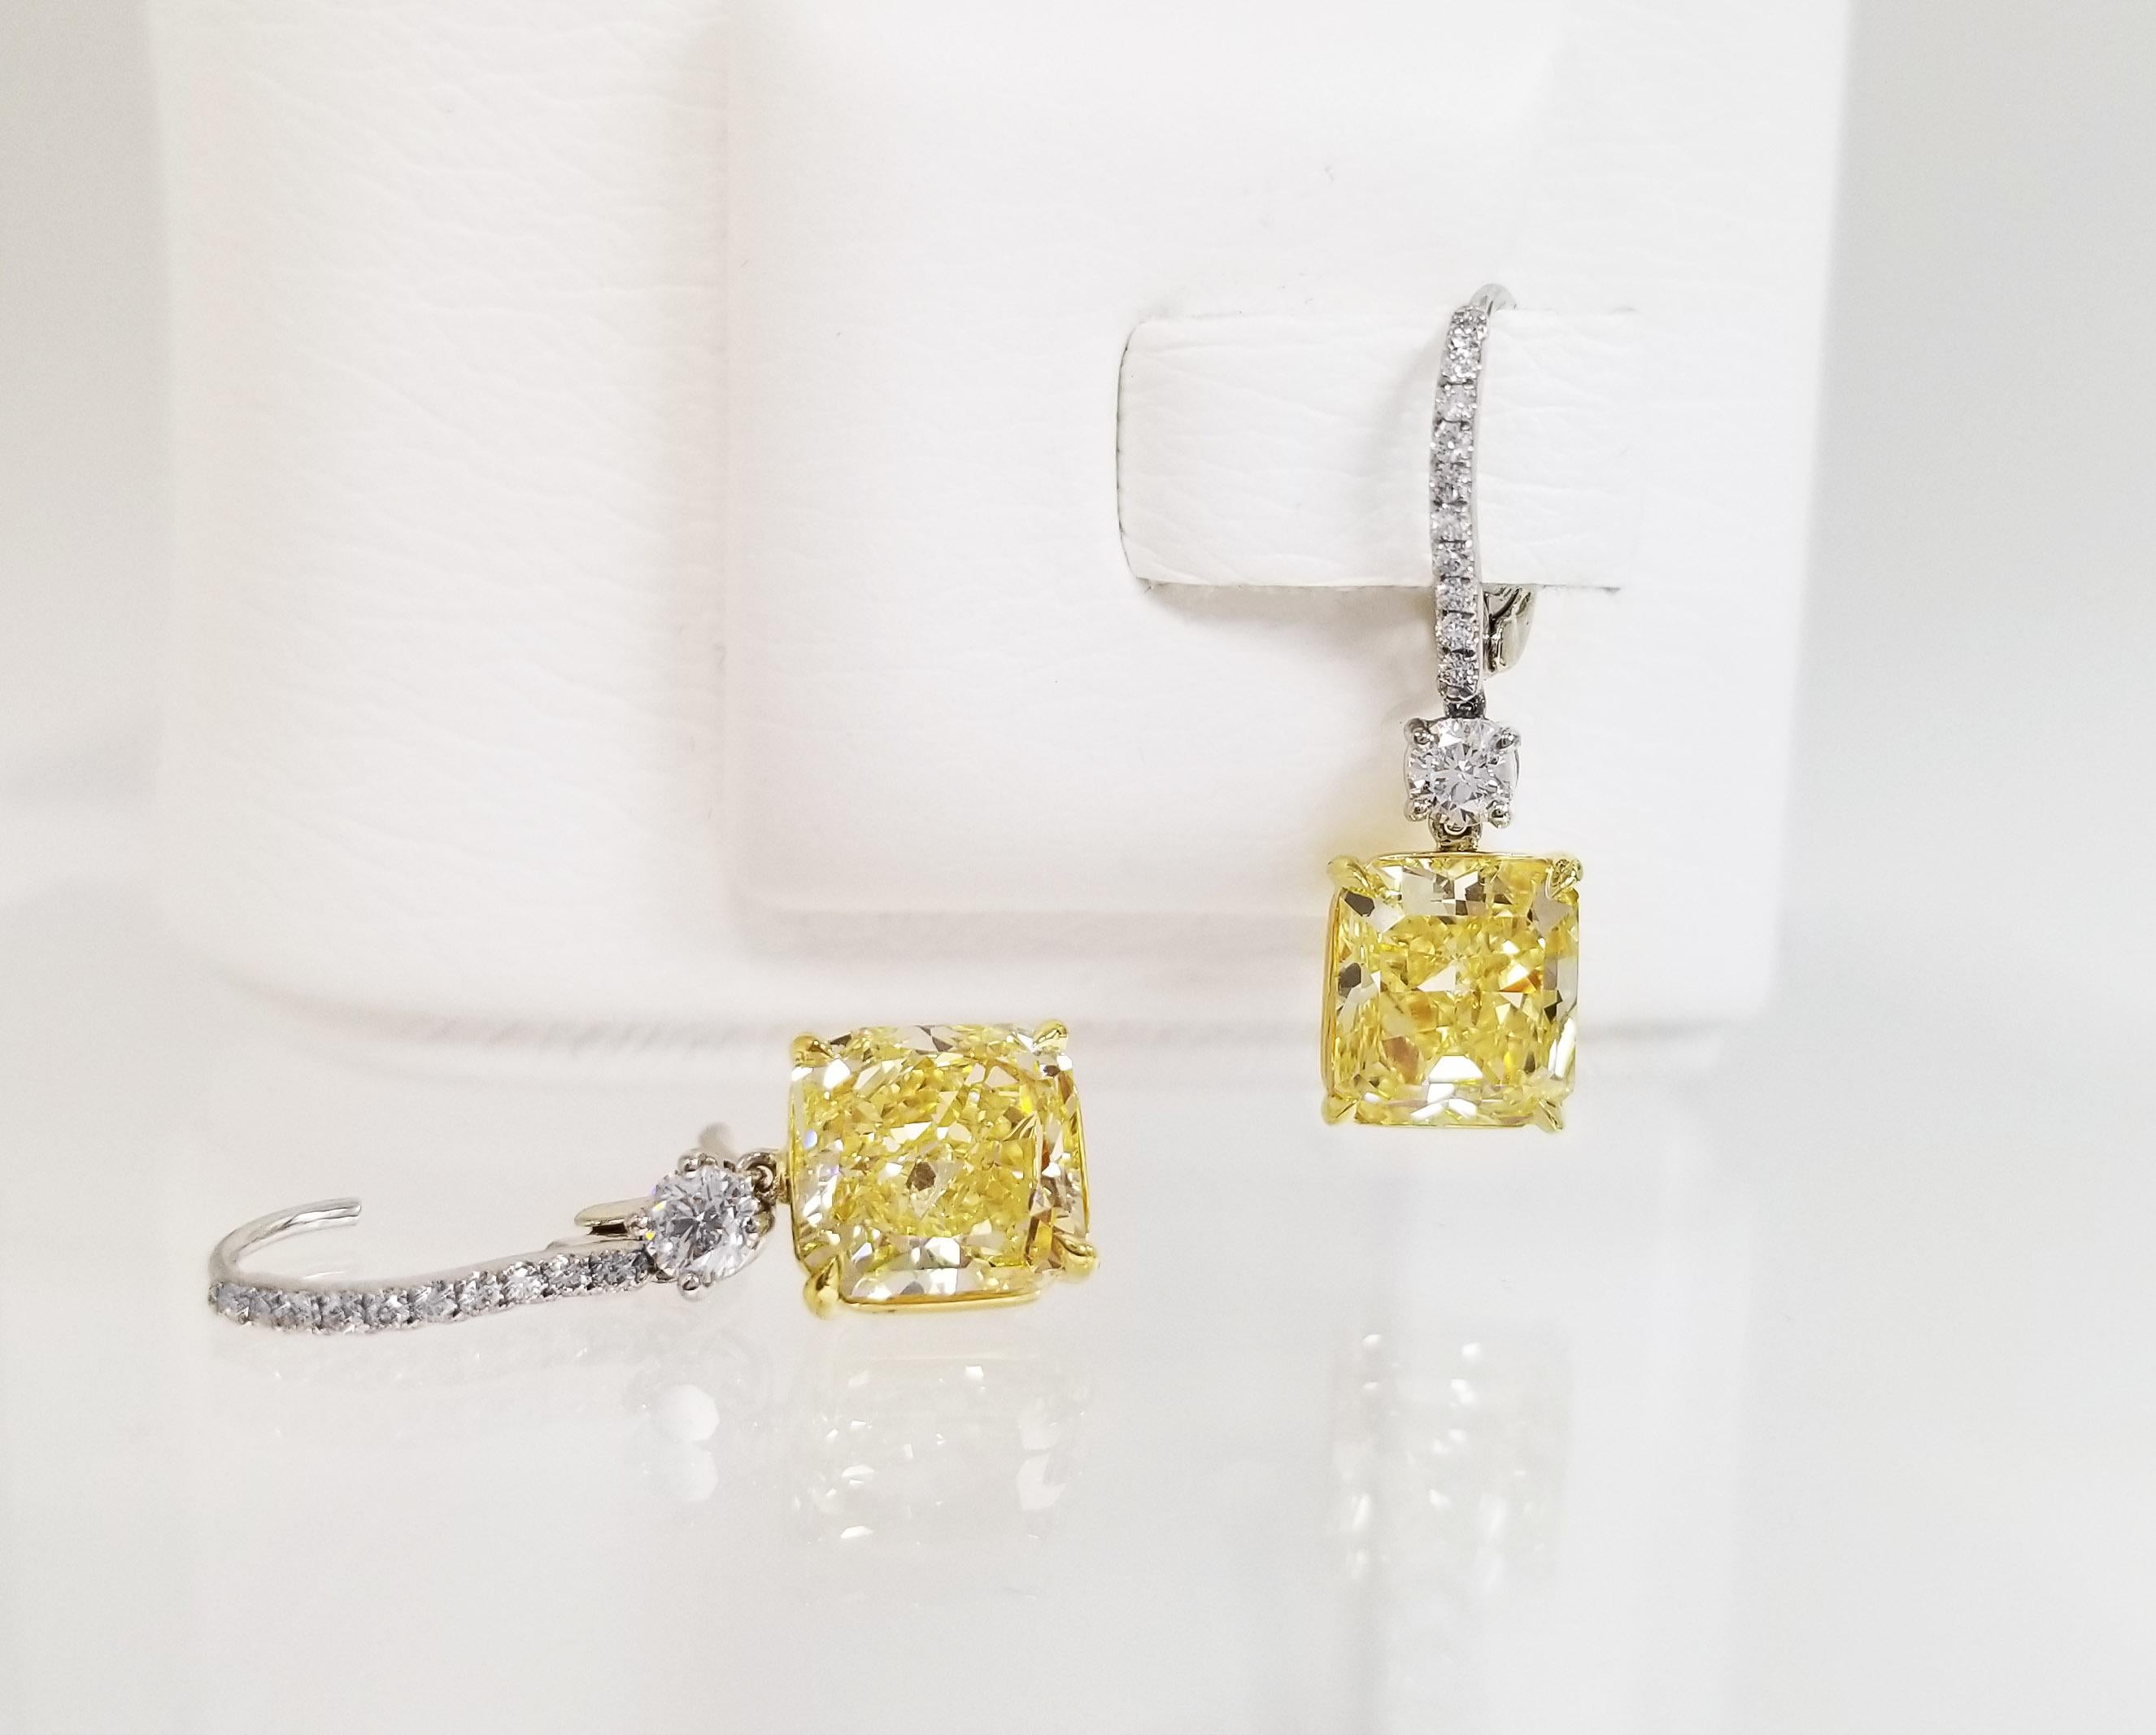 Contemporary SCARSELLI Dangle Earrings in Platinum 3+ Carat Fancy Intense Yellow Diamond GIA